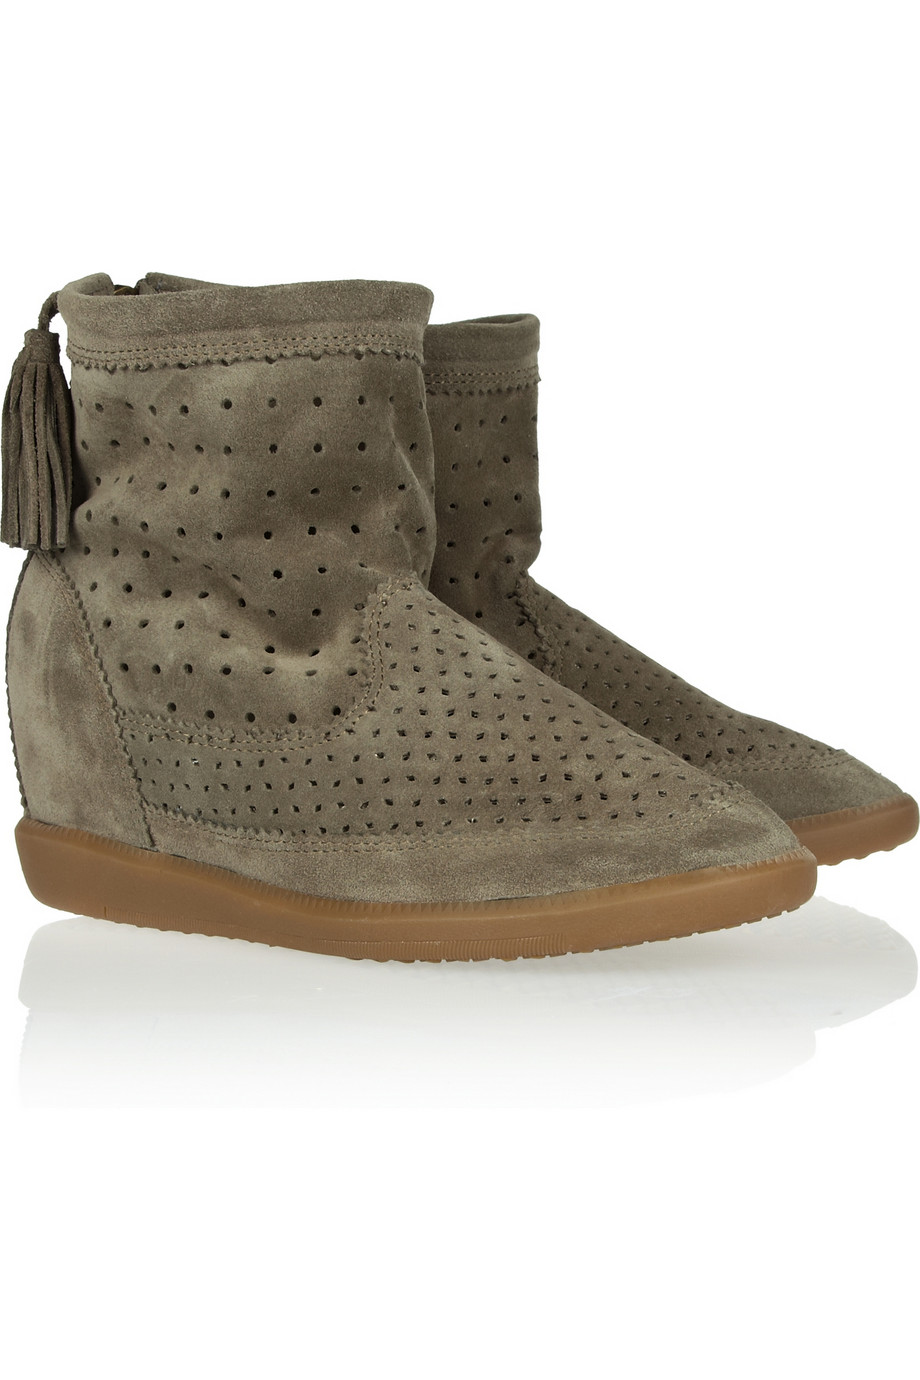 Lovin': Isabel Marant Basley Trainers - Style, culture, food - V for